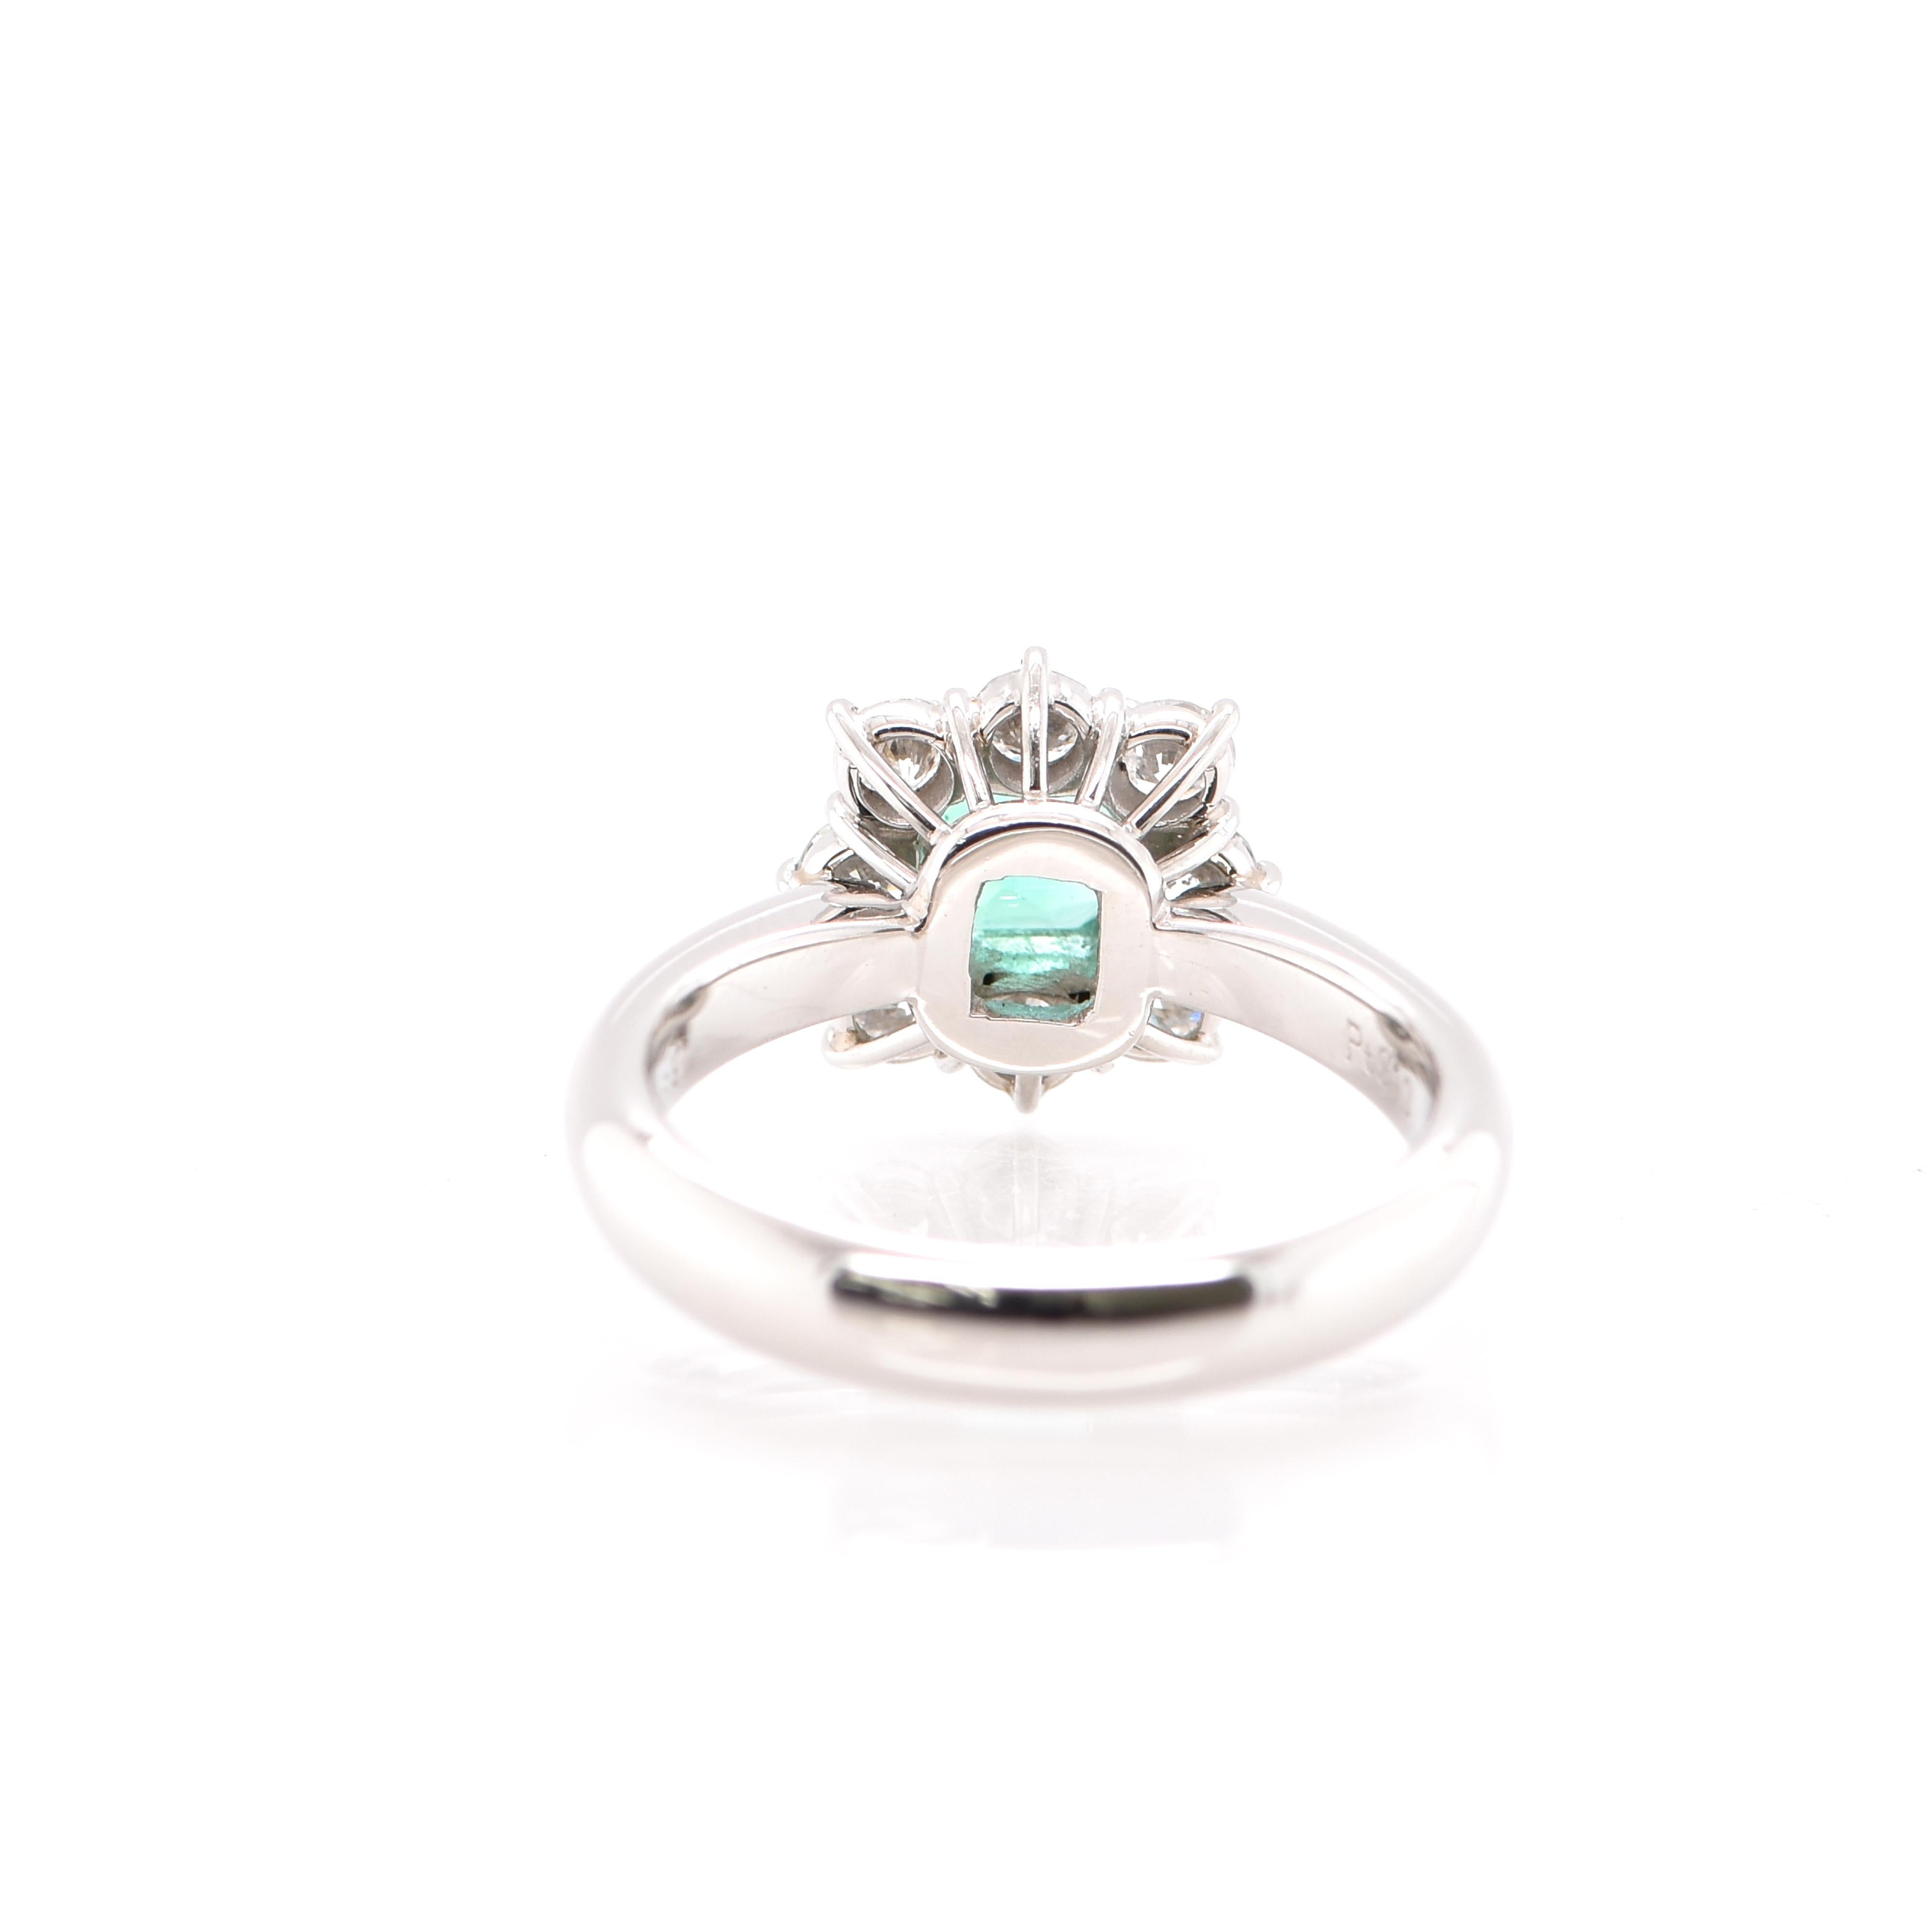 A gorgeous Cluster Ring featuring a GIA Certified 0.61 Carat No Oil Colombian Emerald and 0.69 Carats of Diamond Accents set in Platinum. People have admired emerald’s green for thousands of years. Emeralds have always been associated with the